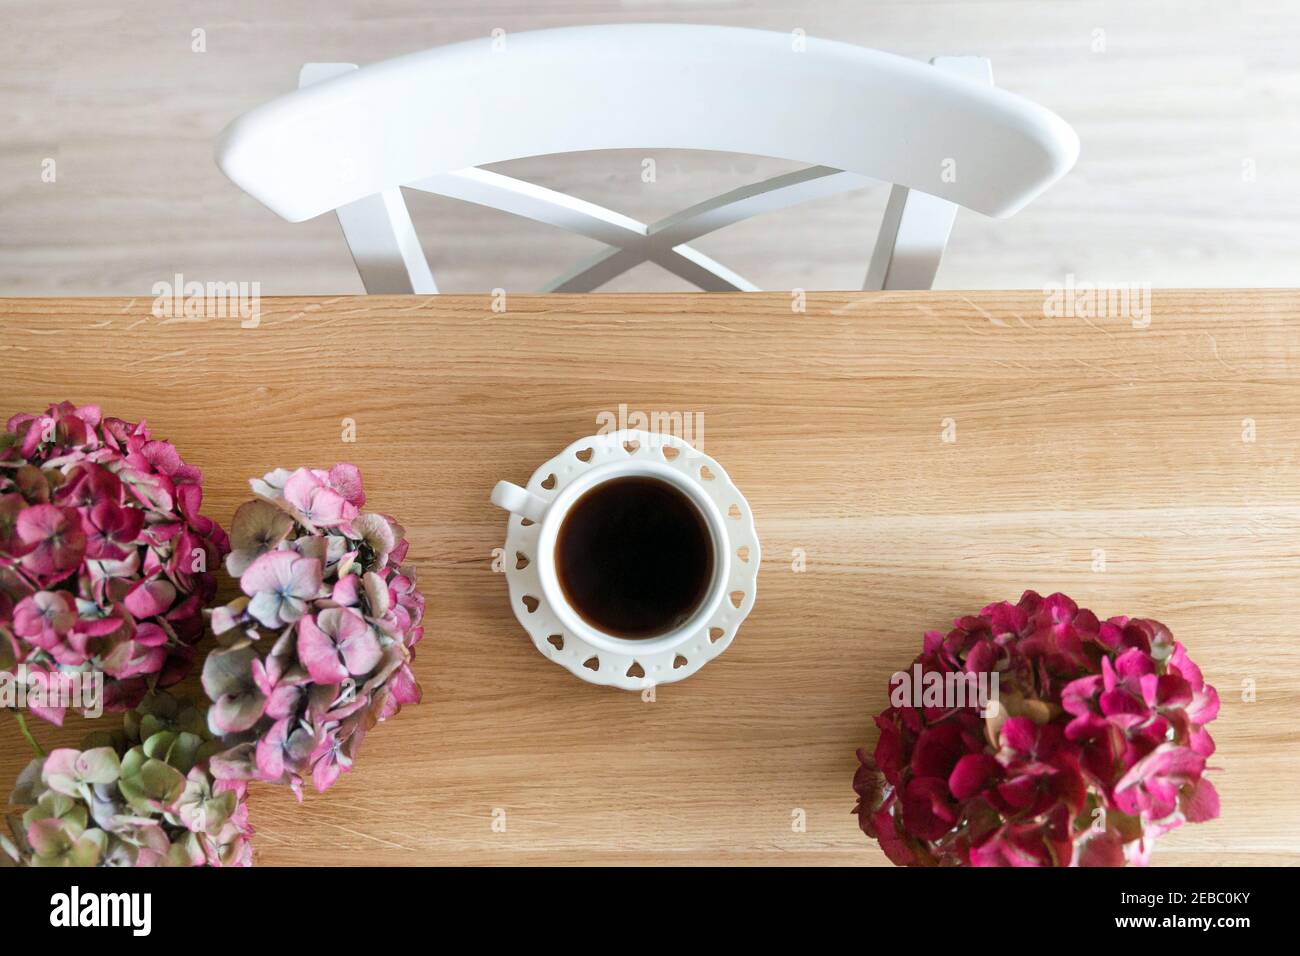 Coffee in white cup on the table among flowers of hydrangea Stock Photo